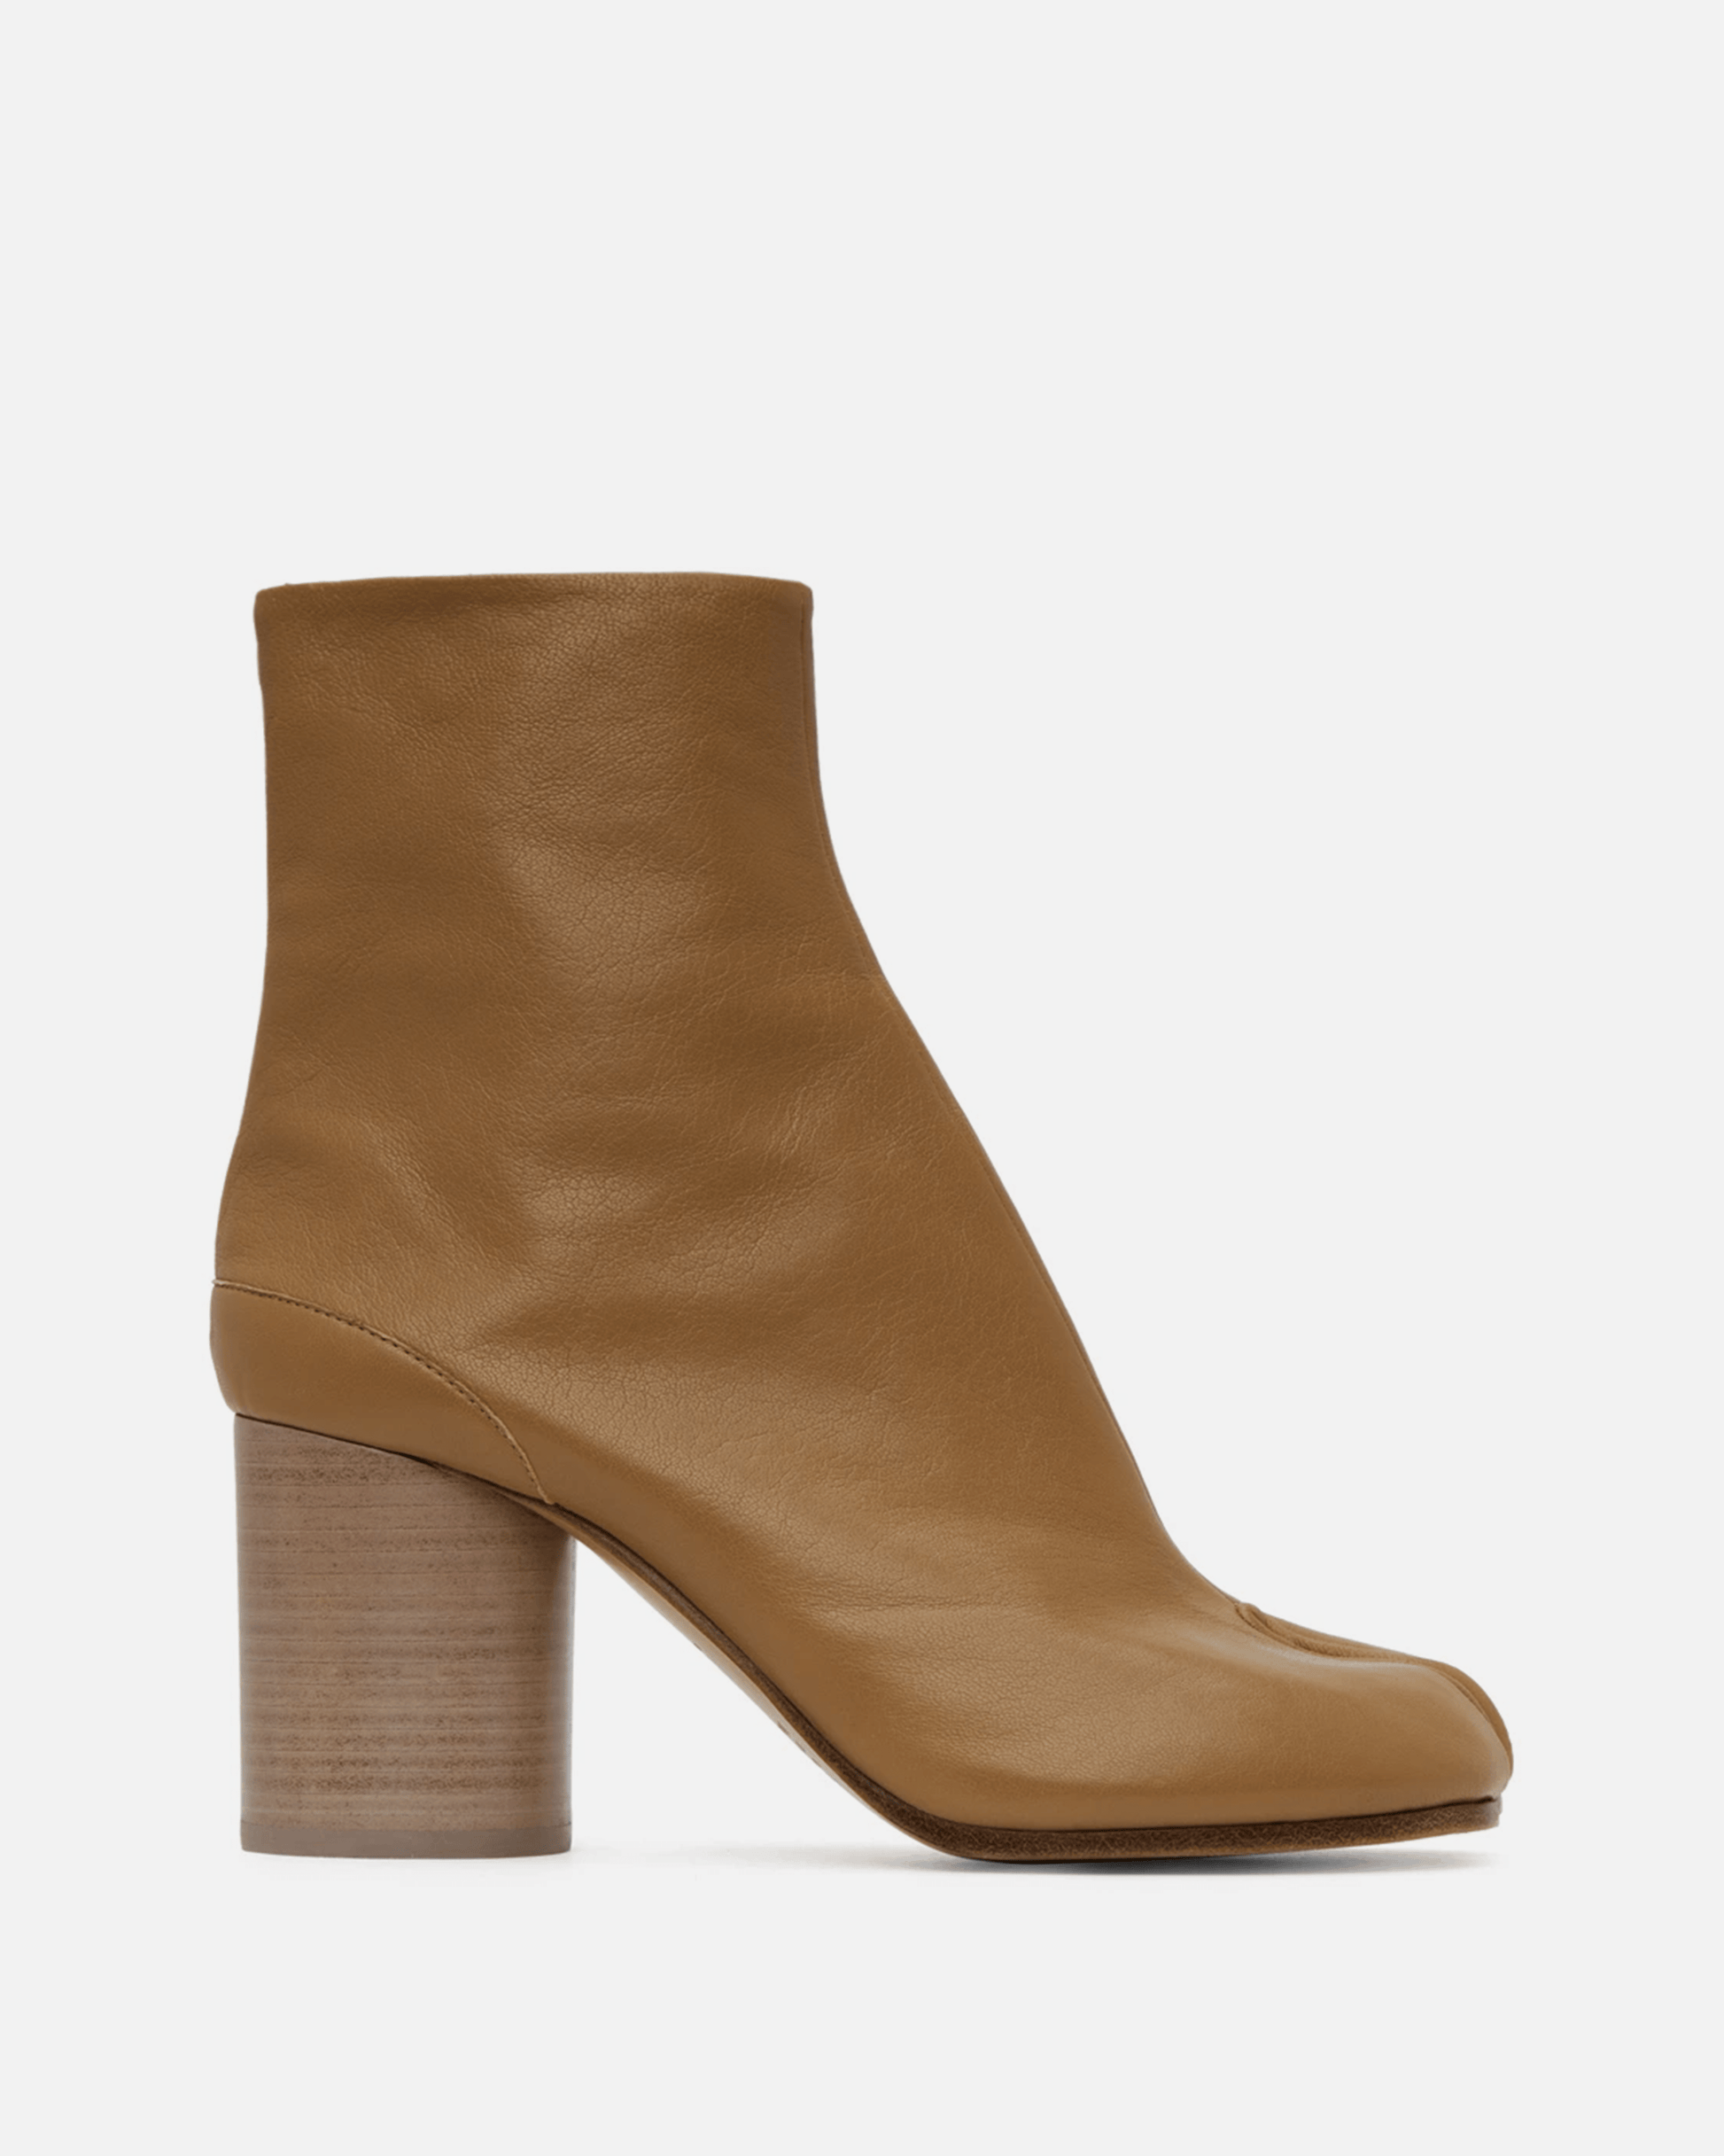 Maison Margiela Women Boots Tabi Leather Ankle Boots in Nude